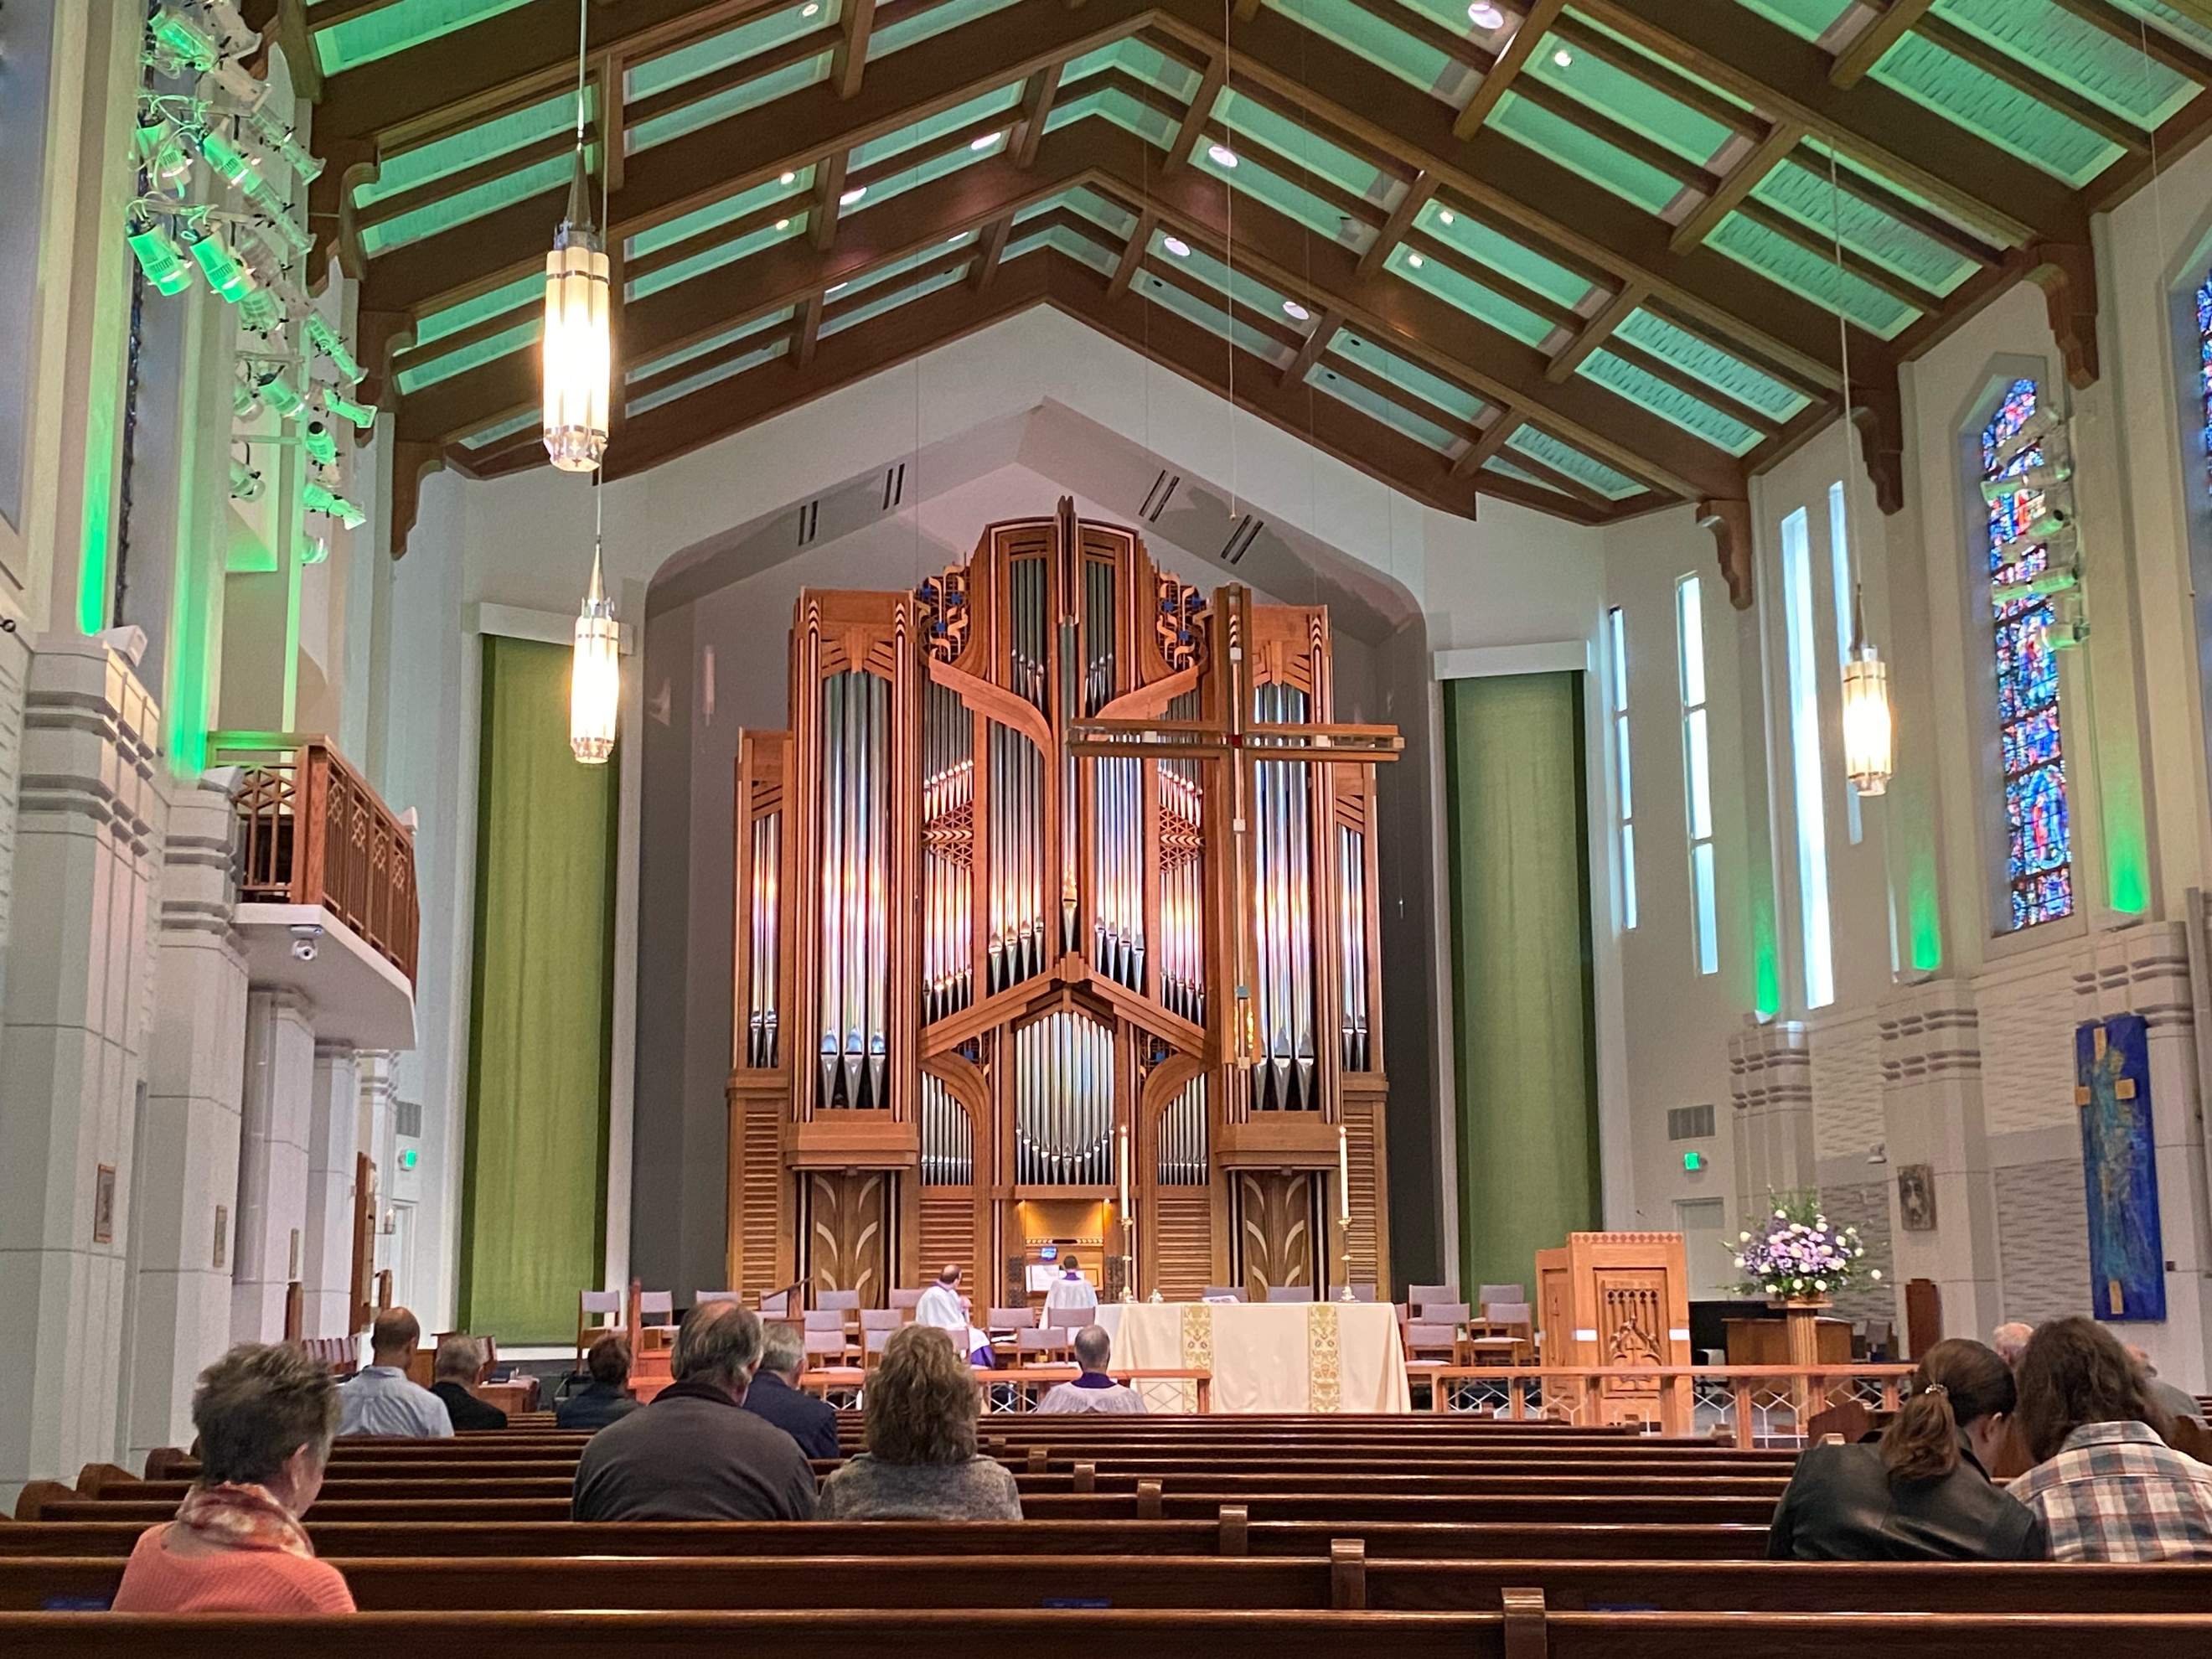 The Richards, Fowkes & Co. pipe organ was installed in 2020.